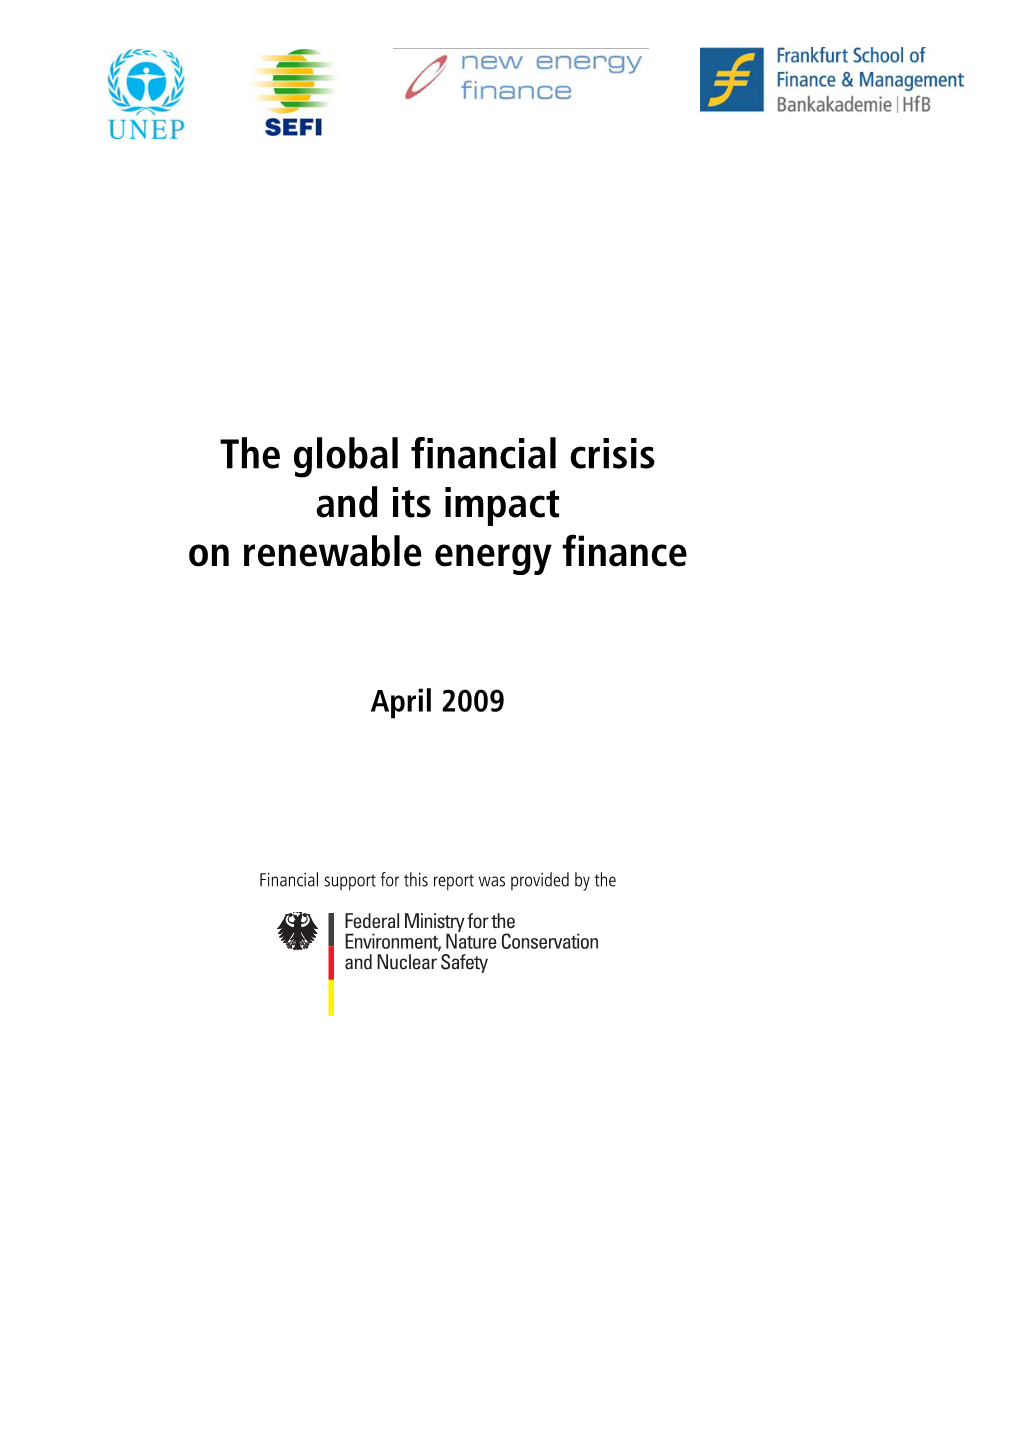 The Global Financial Crisis and Its Impact on Renewable Energy Finance